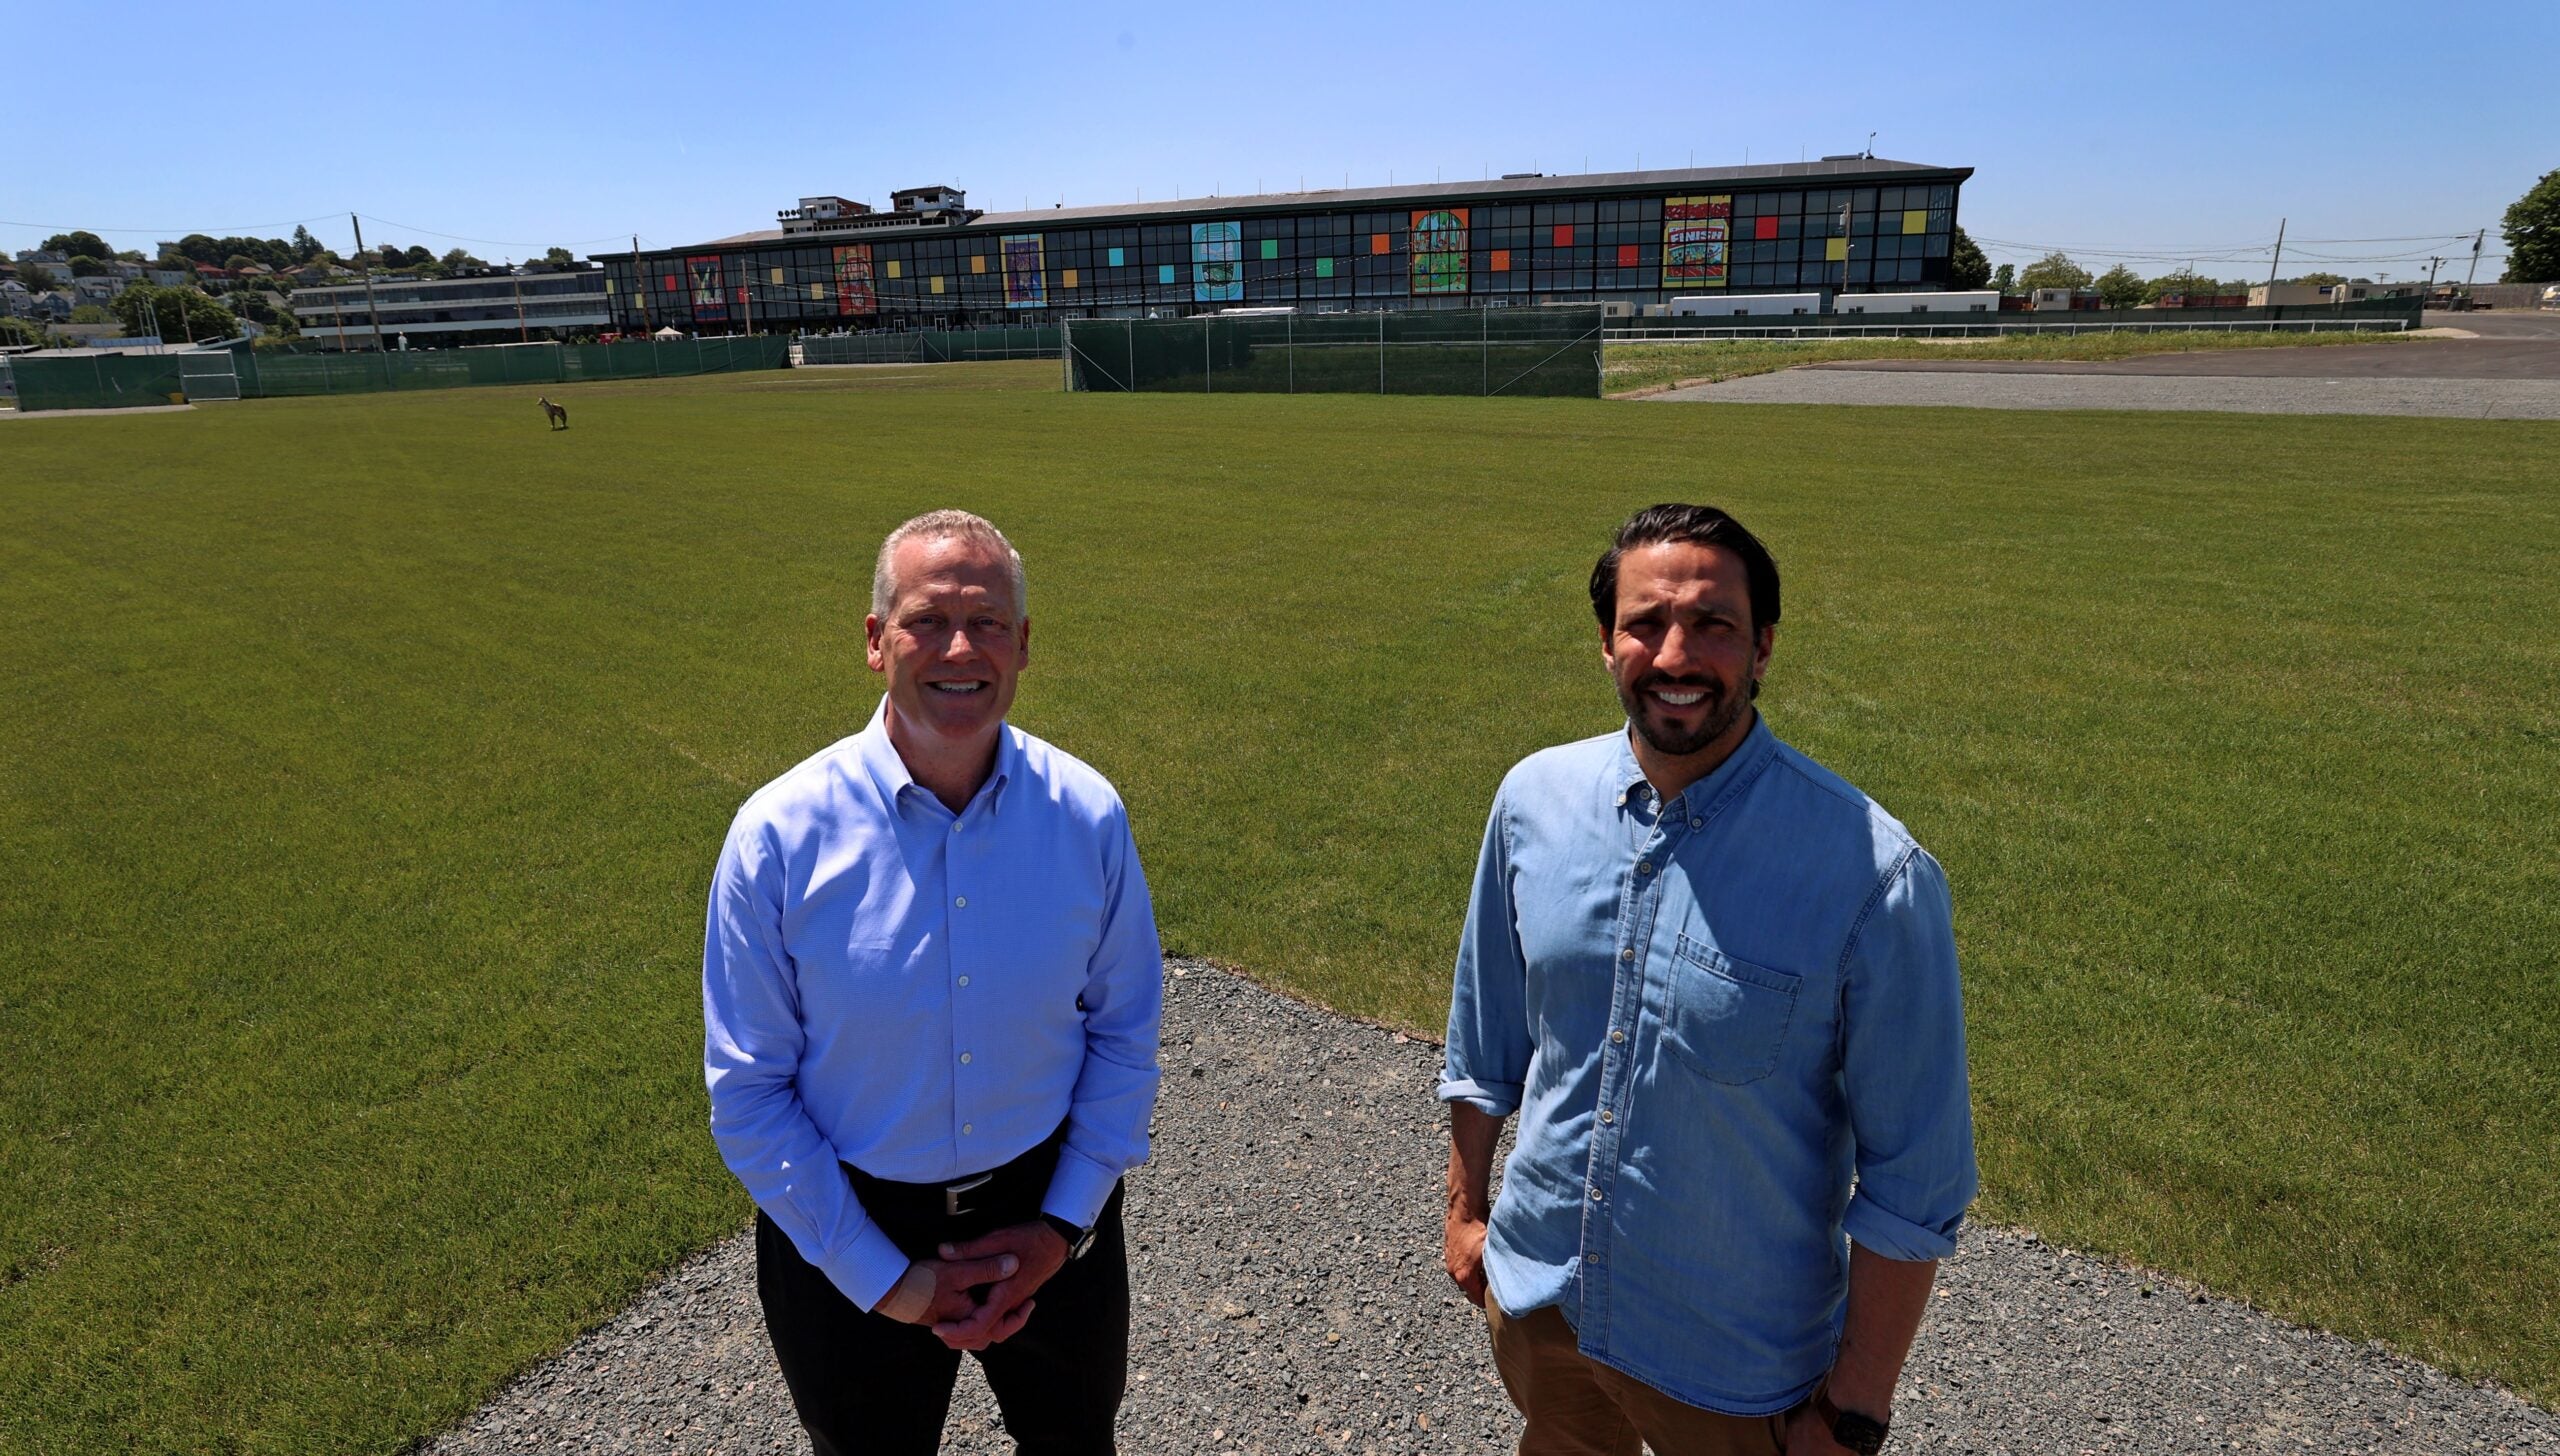 Tom O’Brien, Managing Partner and Chief Executive Officer of HYM and Josh Bhatti, Senior Vice President of The Bowery Presents at the area of The Stage at Suffolk Downs